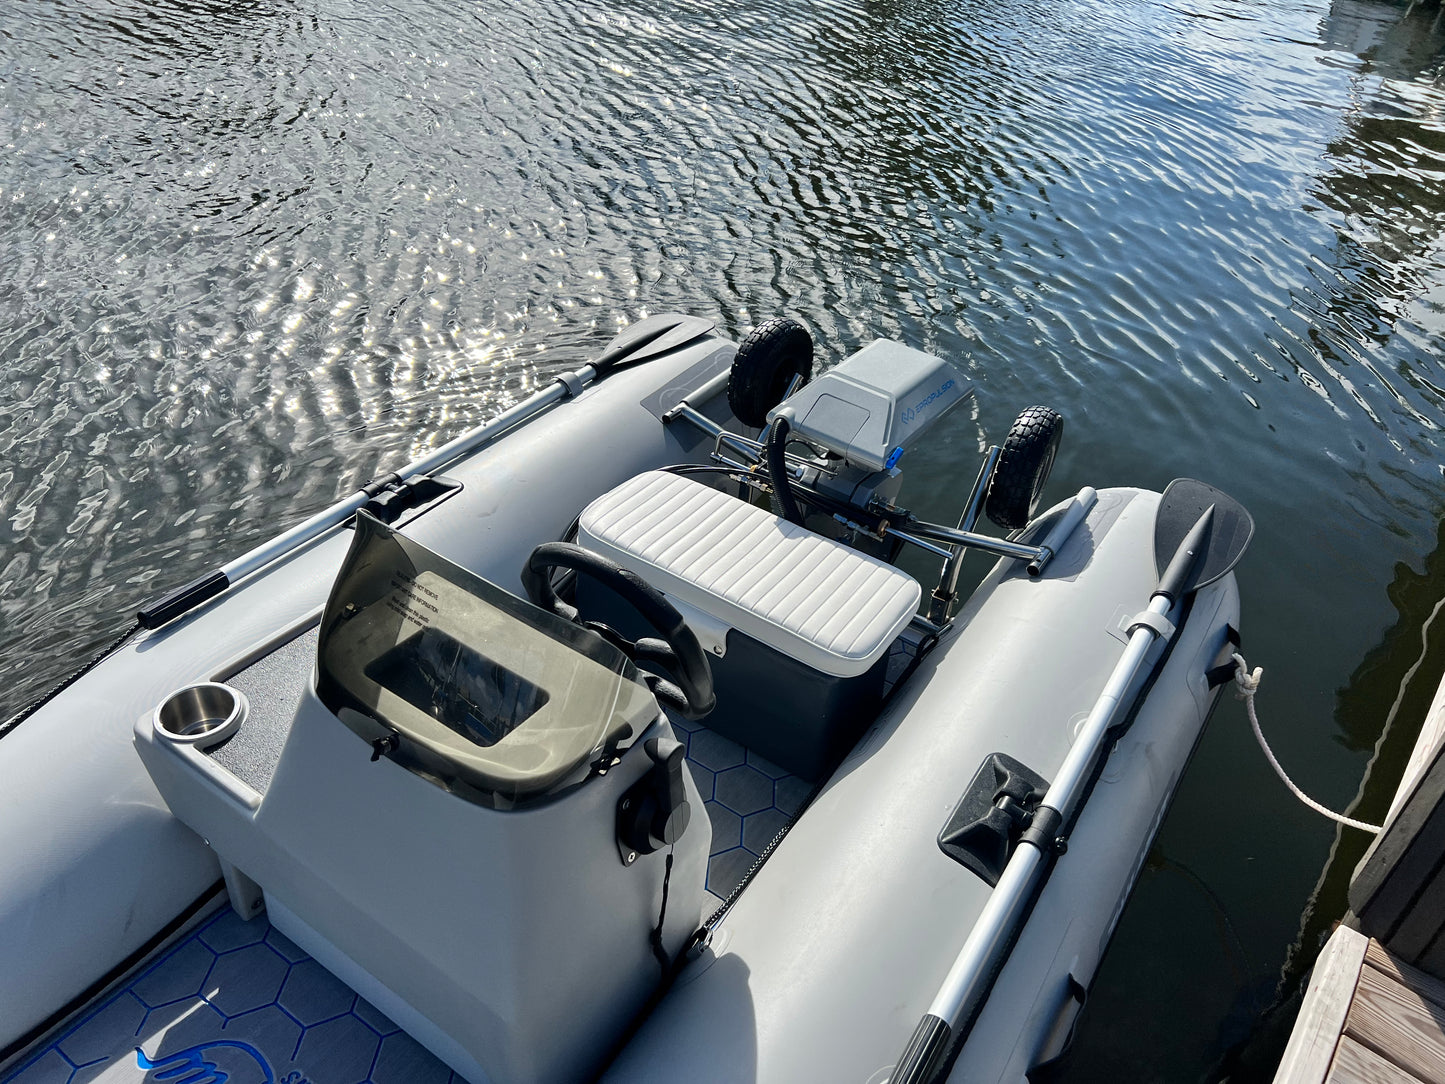 Takacat 300LX E.C.A.R.T Hybrid Dinghy/Tender Package w/ Epropulsion Navy 3 Evo (6hp) and (1) E60 Battery